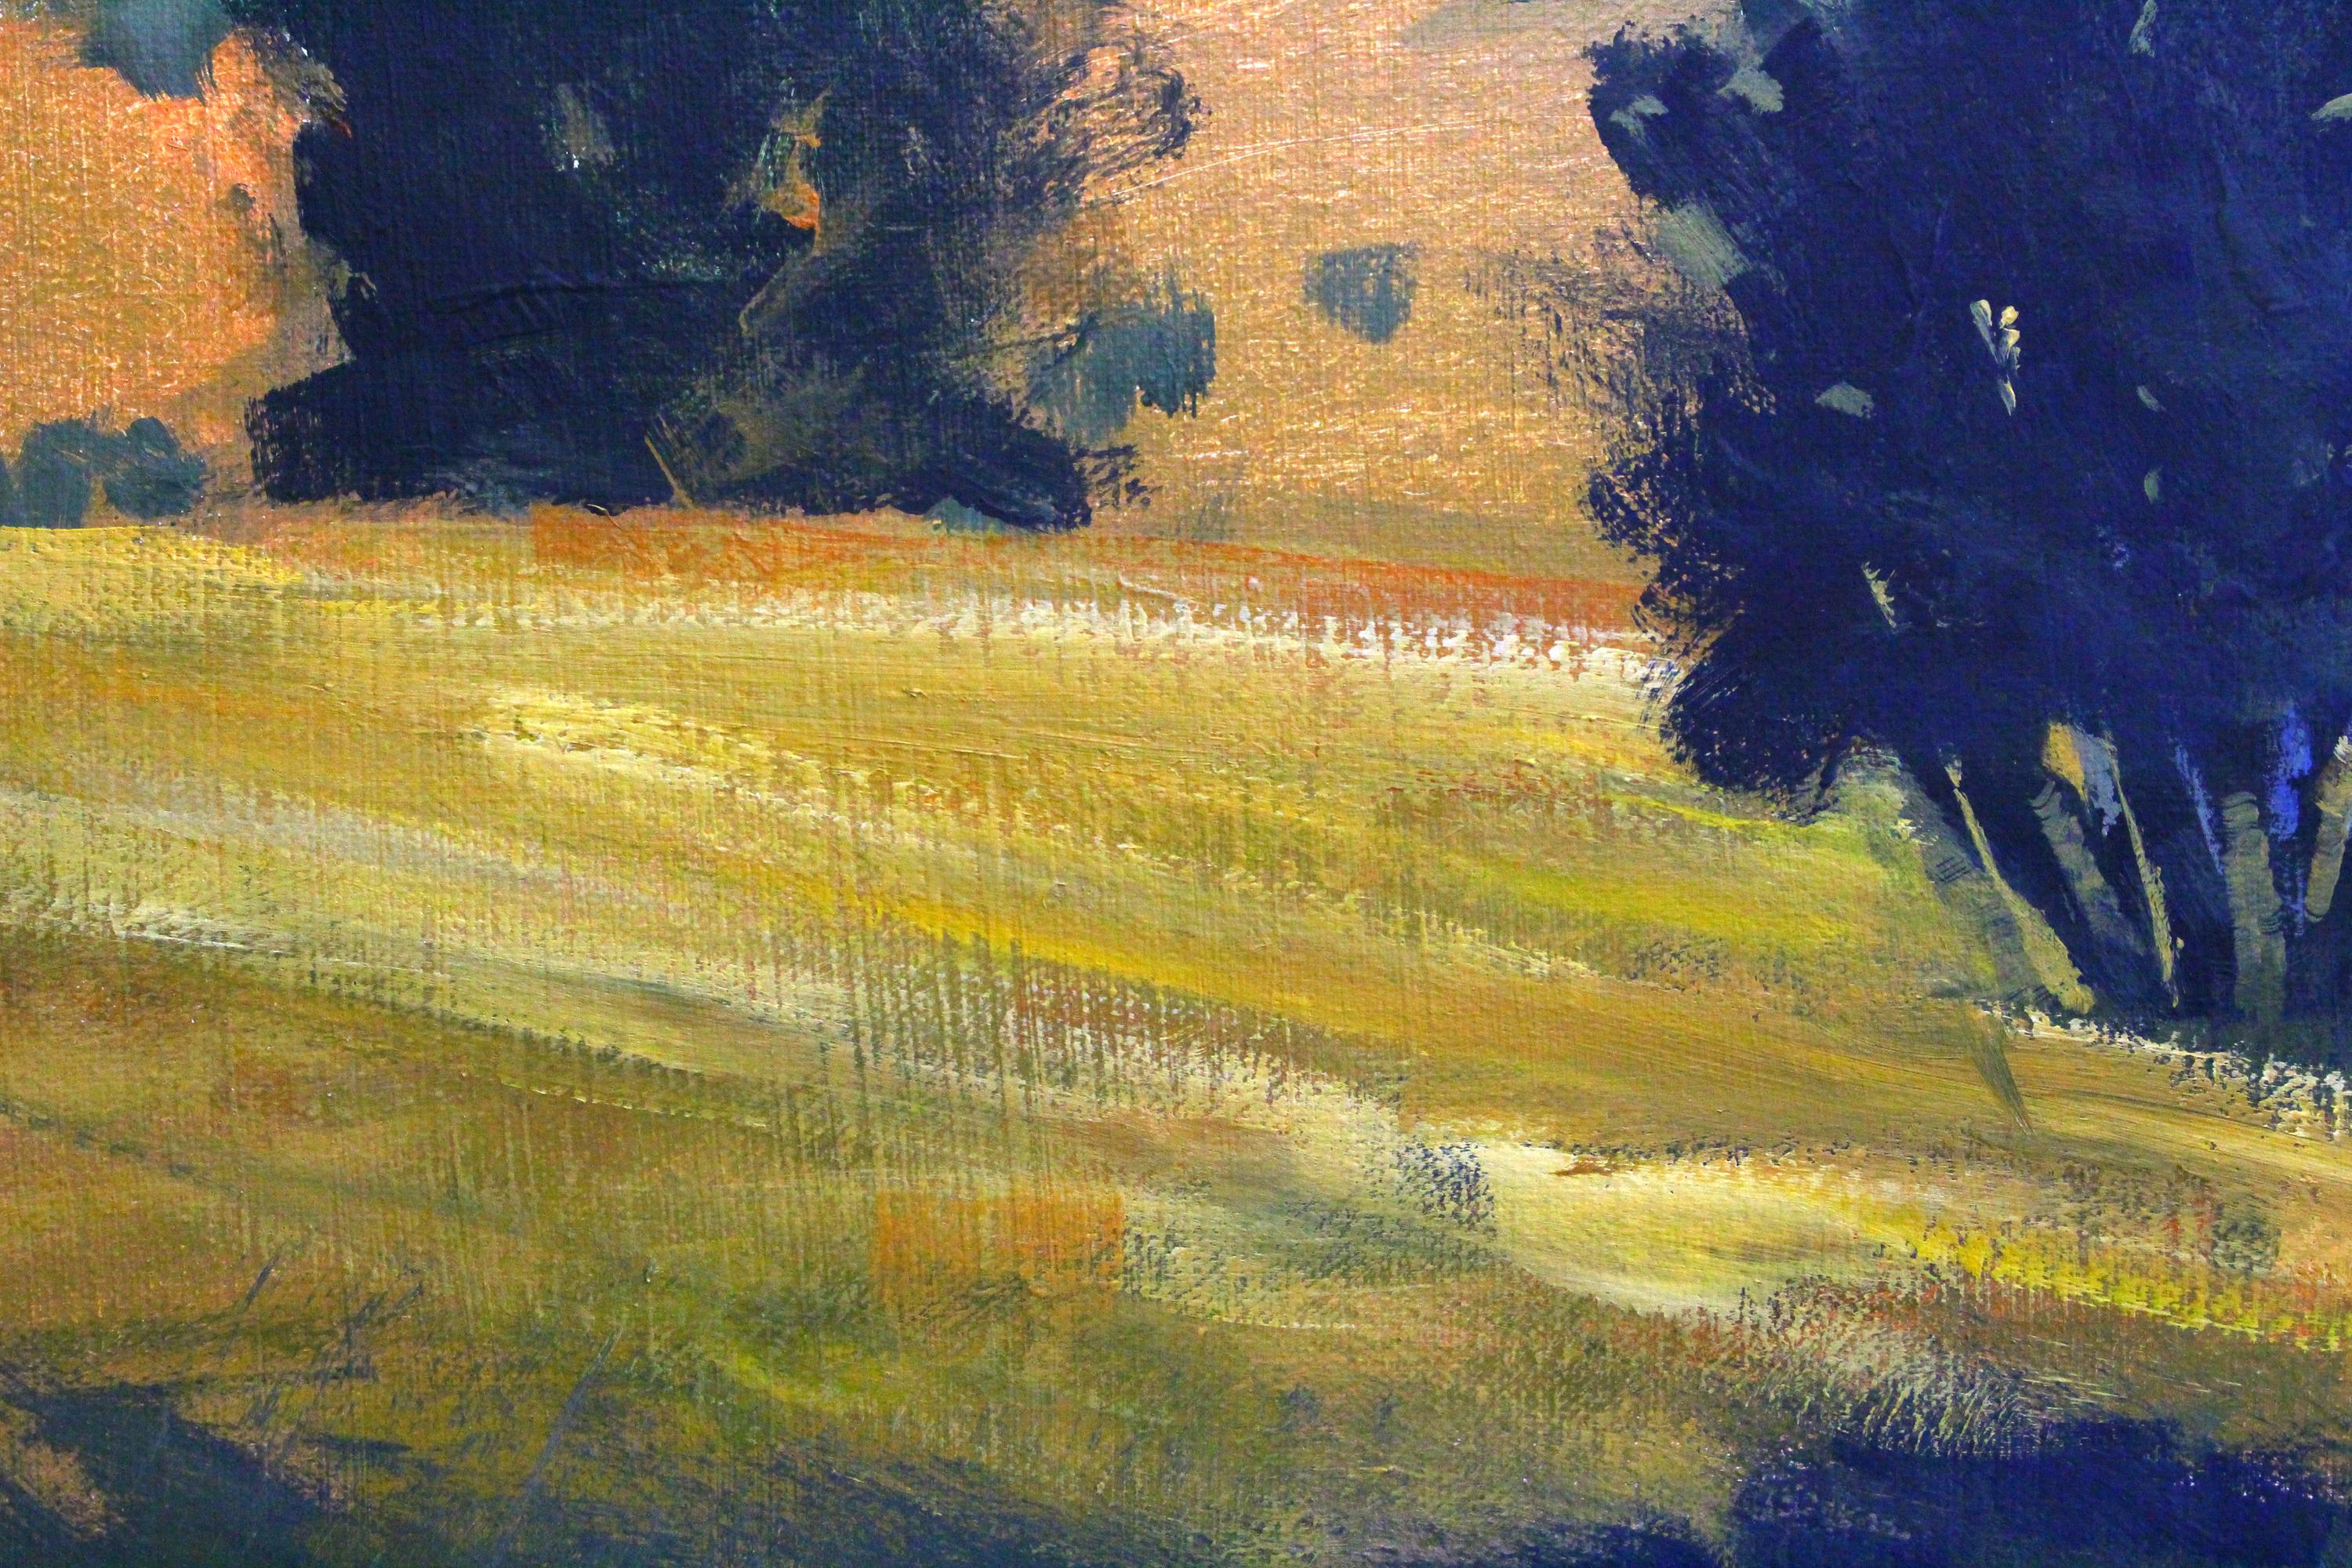 <p>Artist Comments<br />A misty dawn over a western prairie, the yellow grasses and dark foliage contrast suggesting a sunny day to come. Part of Nancy's signature series of nature scenes. She spends a lot of time exploring the landscape around her